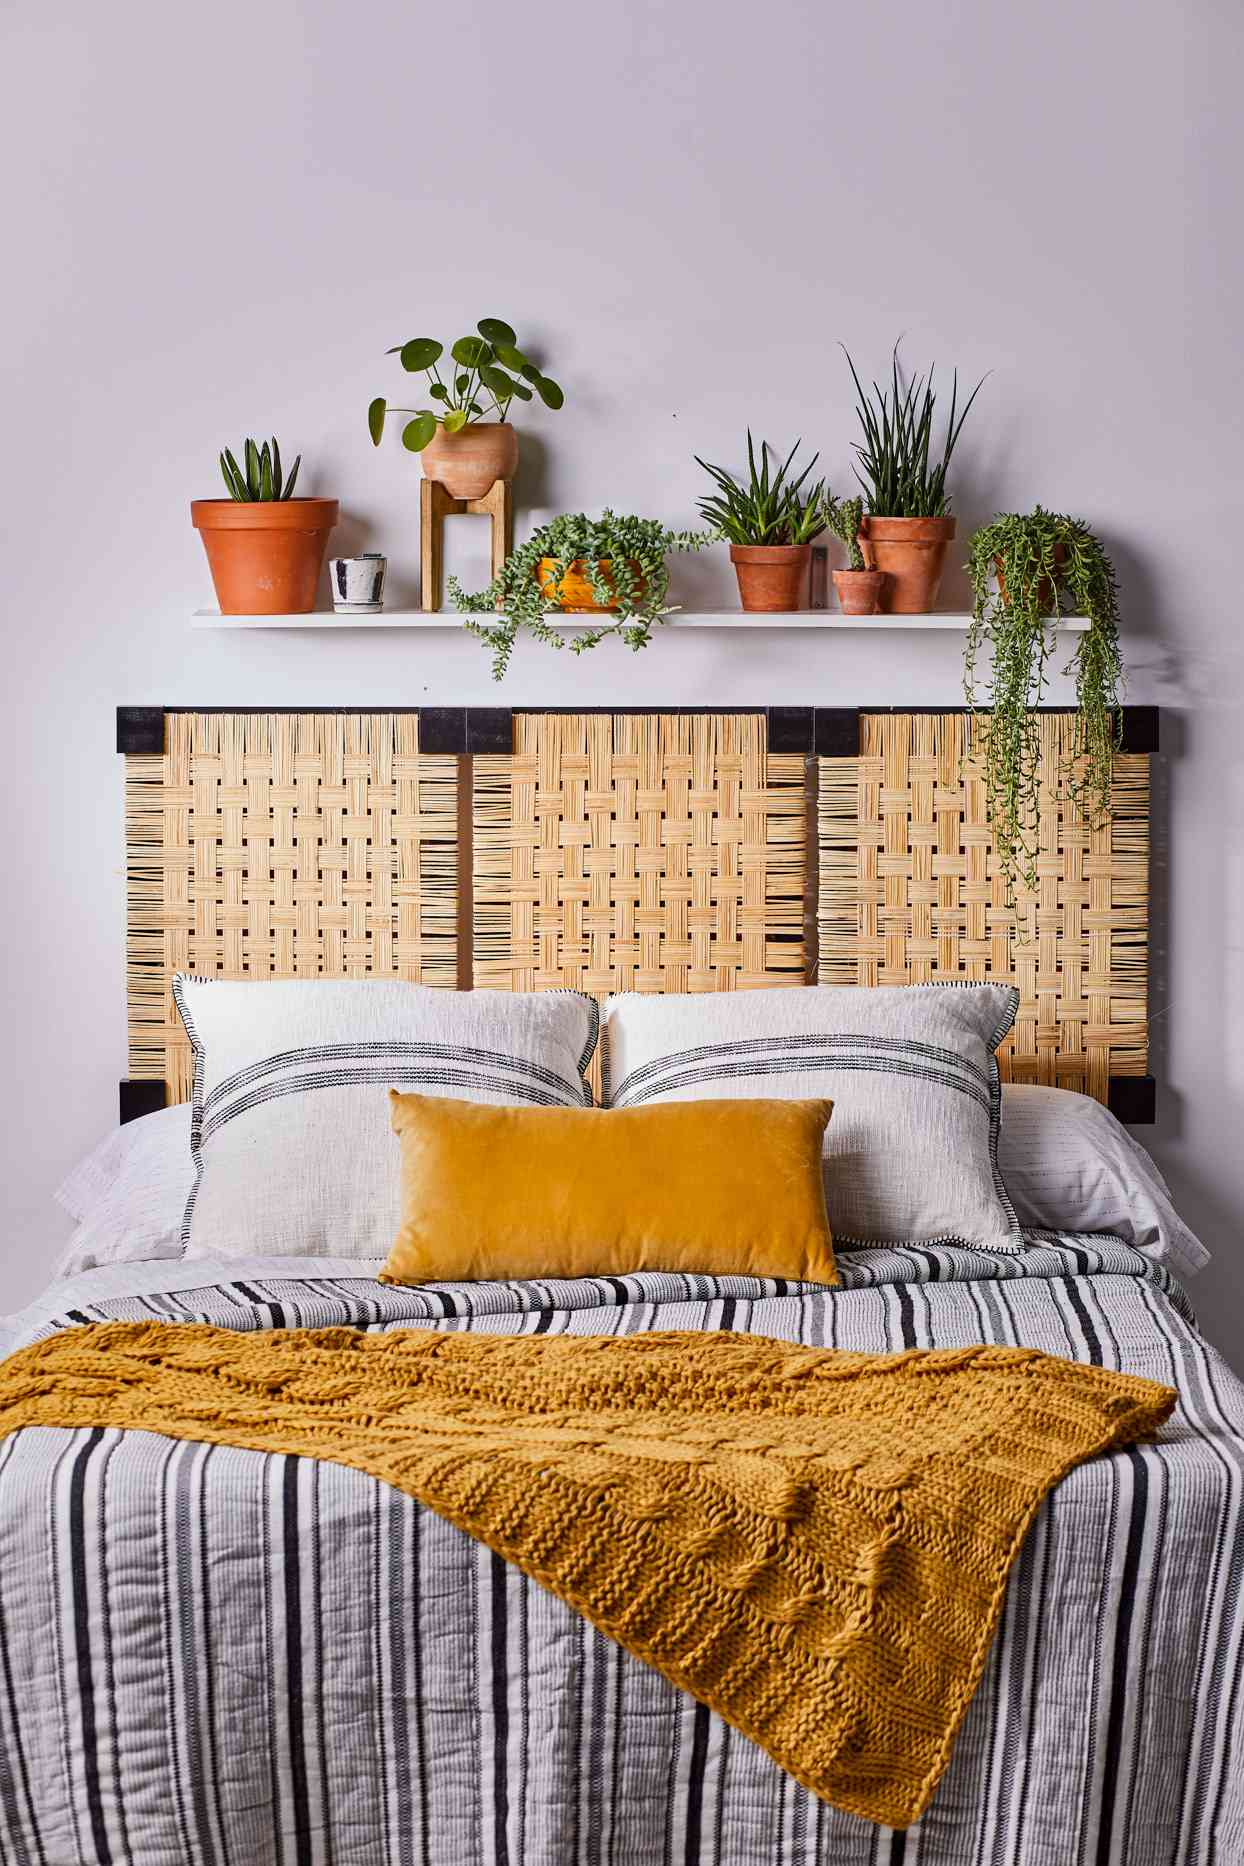 bedroom with striped bed spread and caned headboard